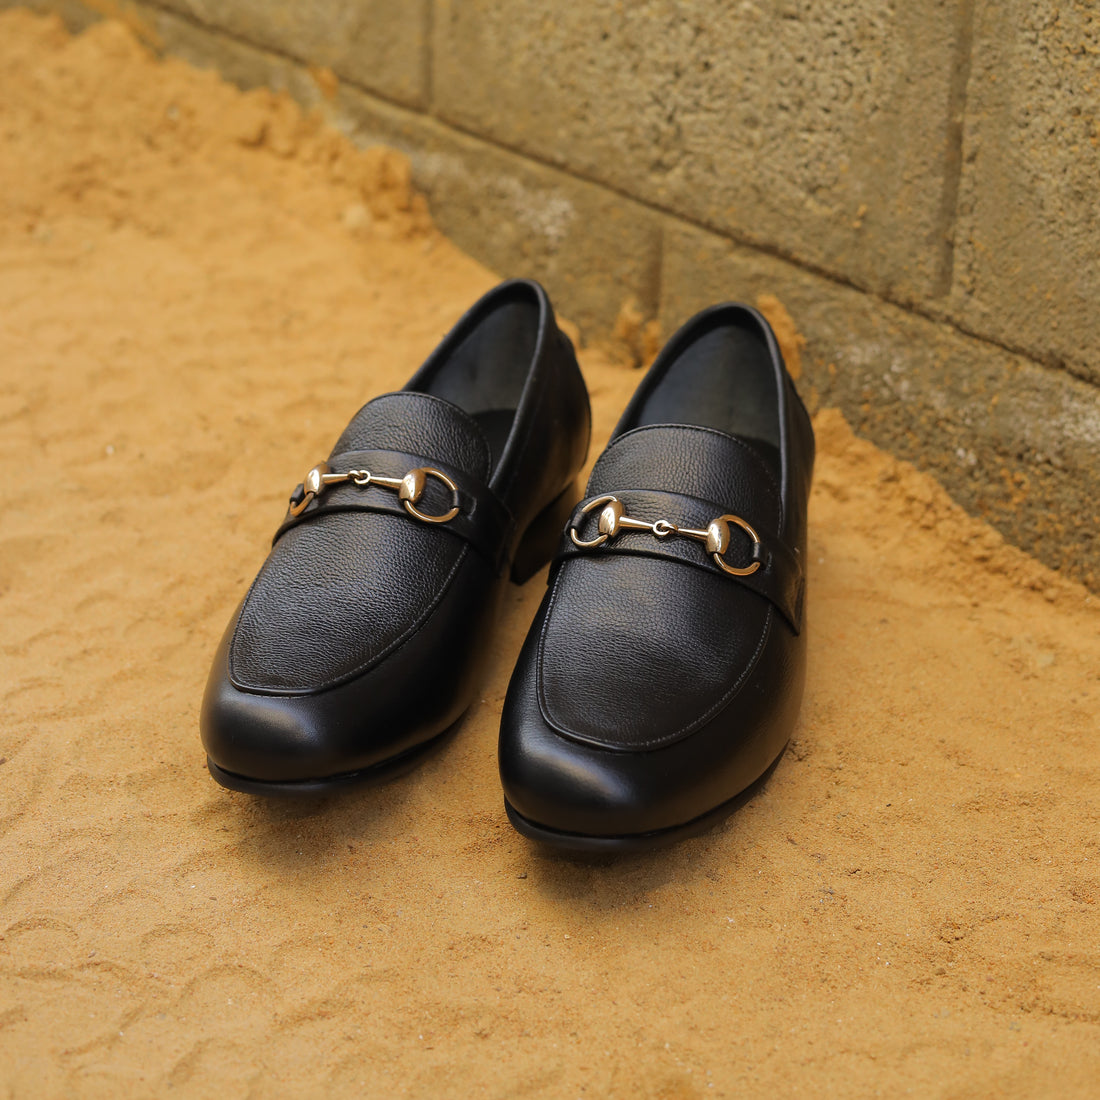 Black Leather Penny Loafers Sleek &amp; Timeless Footwear Professional Office Style